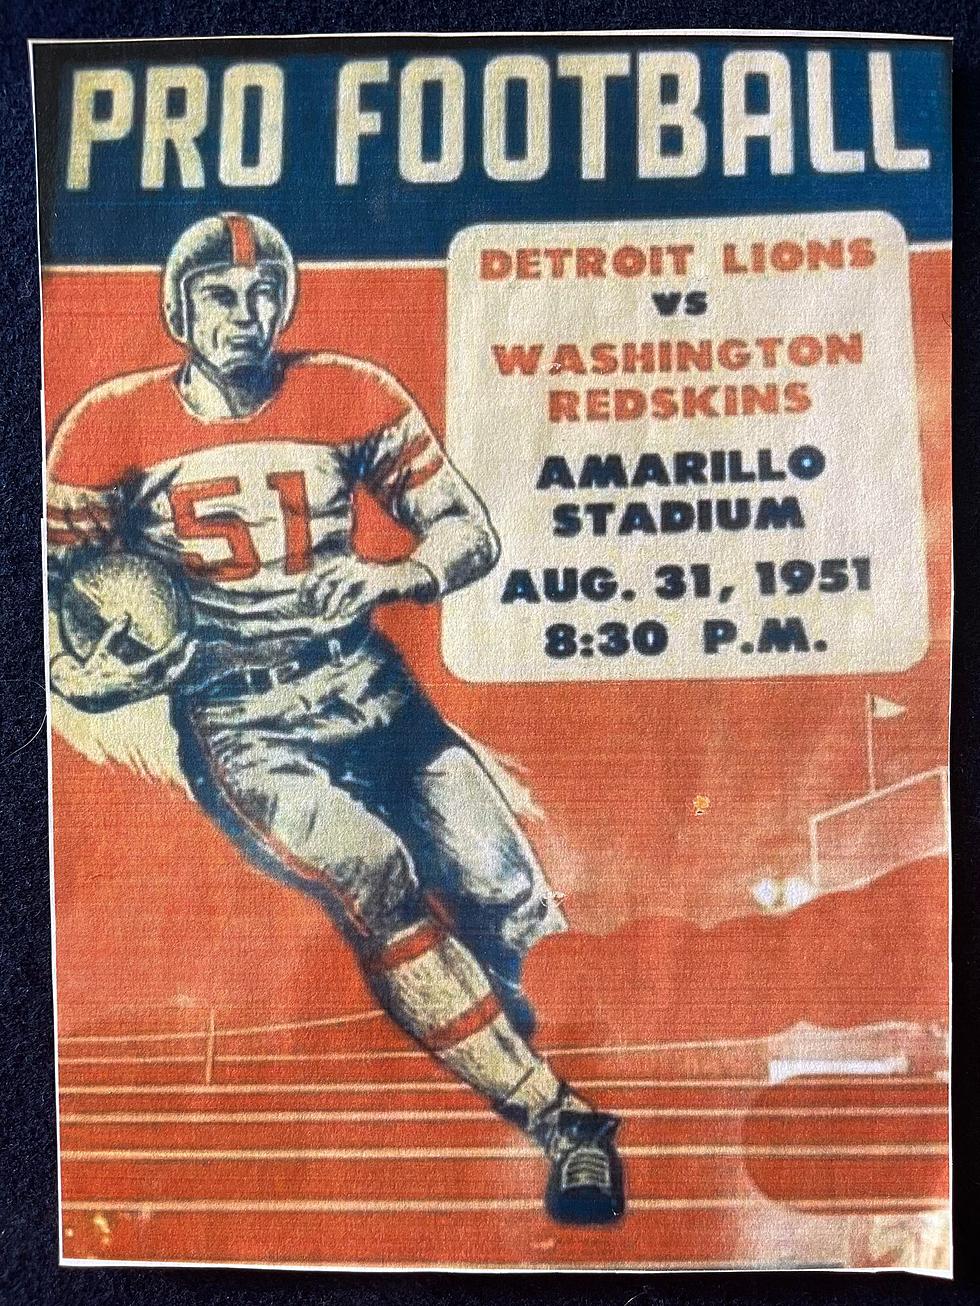 NFL Football In Amarillo? Story Of An Amazing Game.